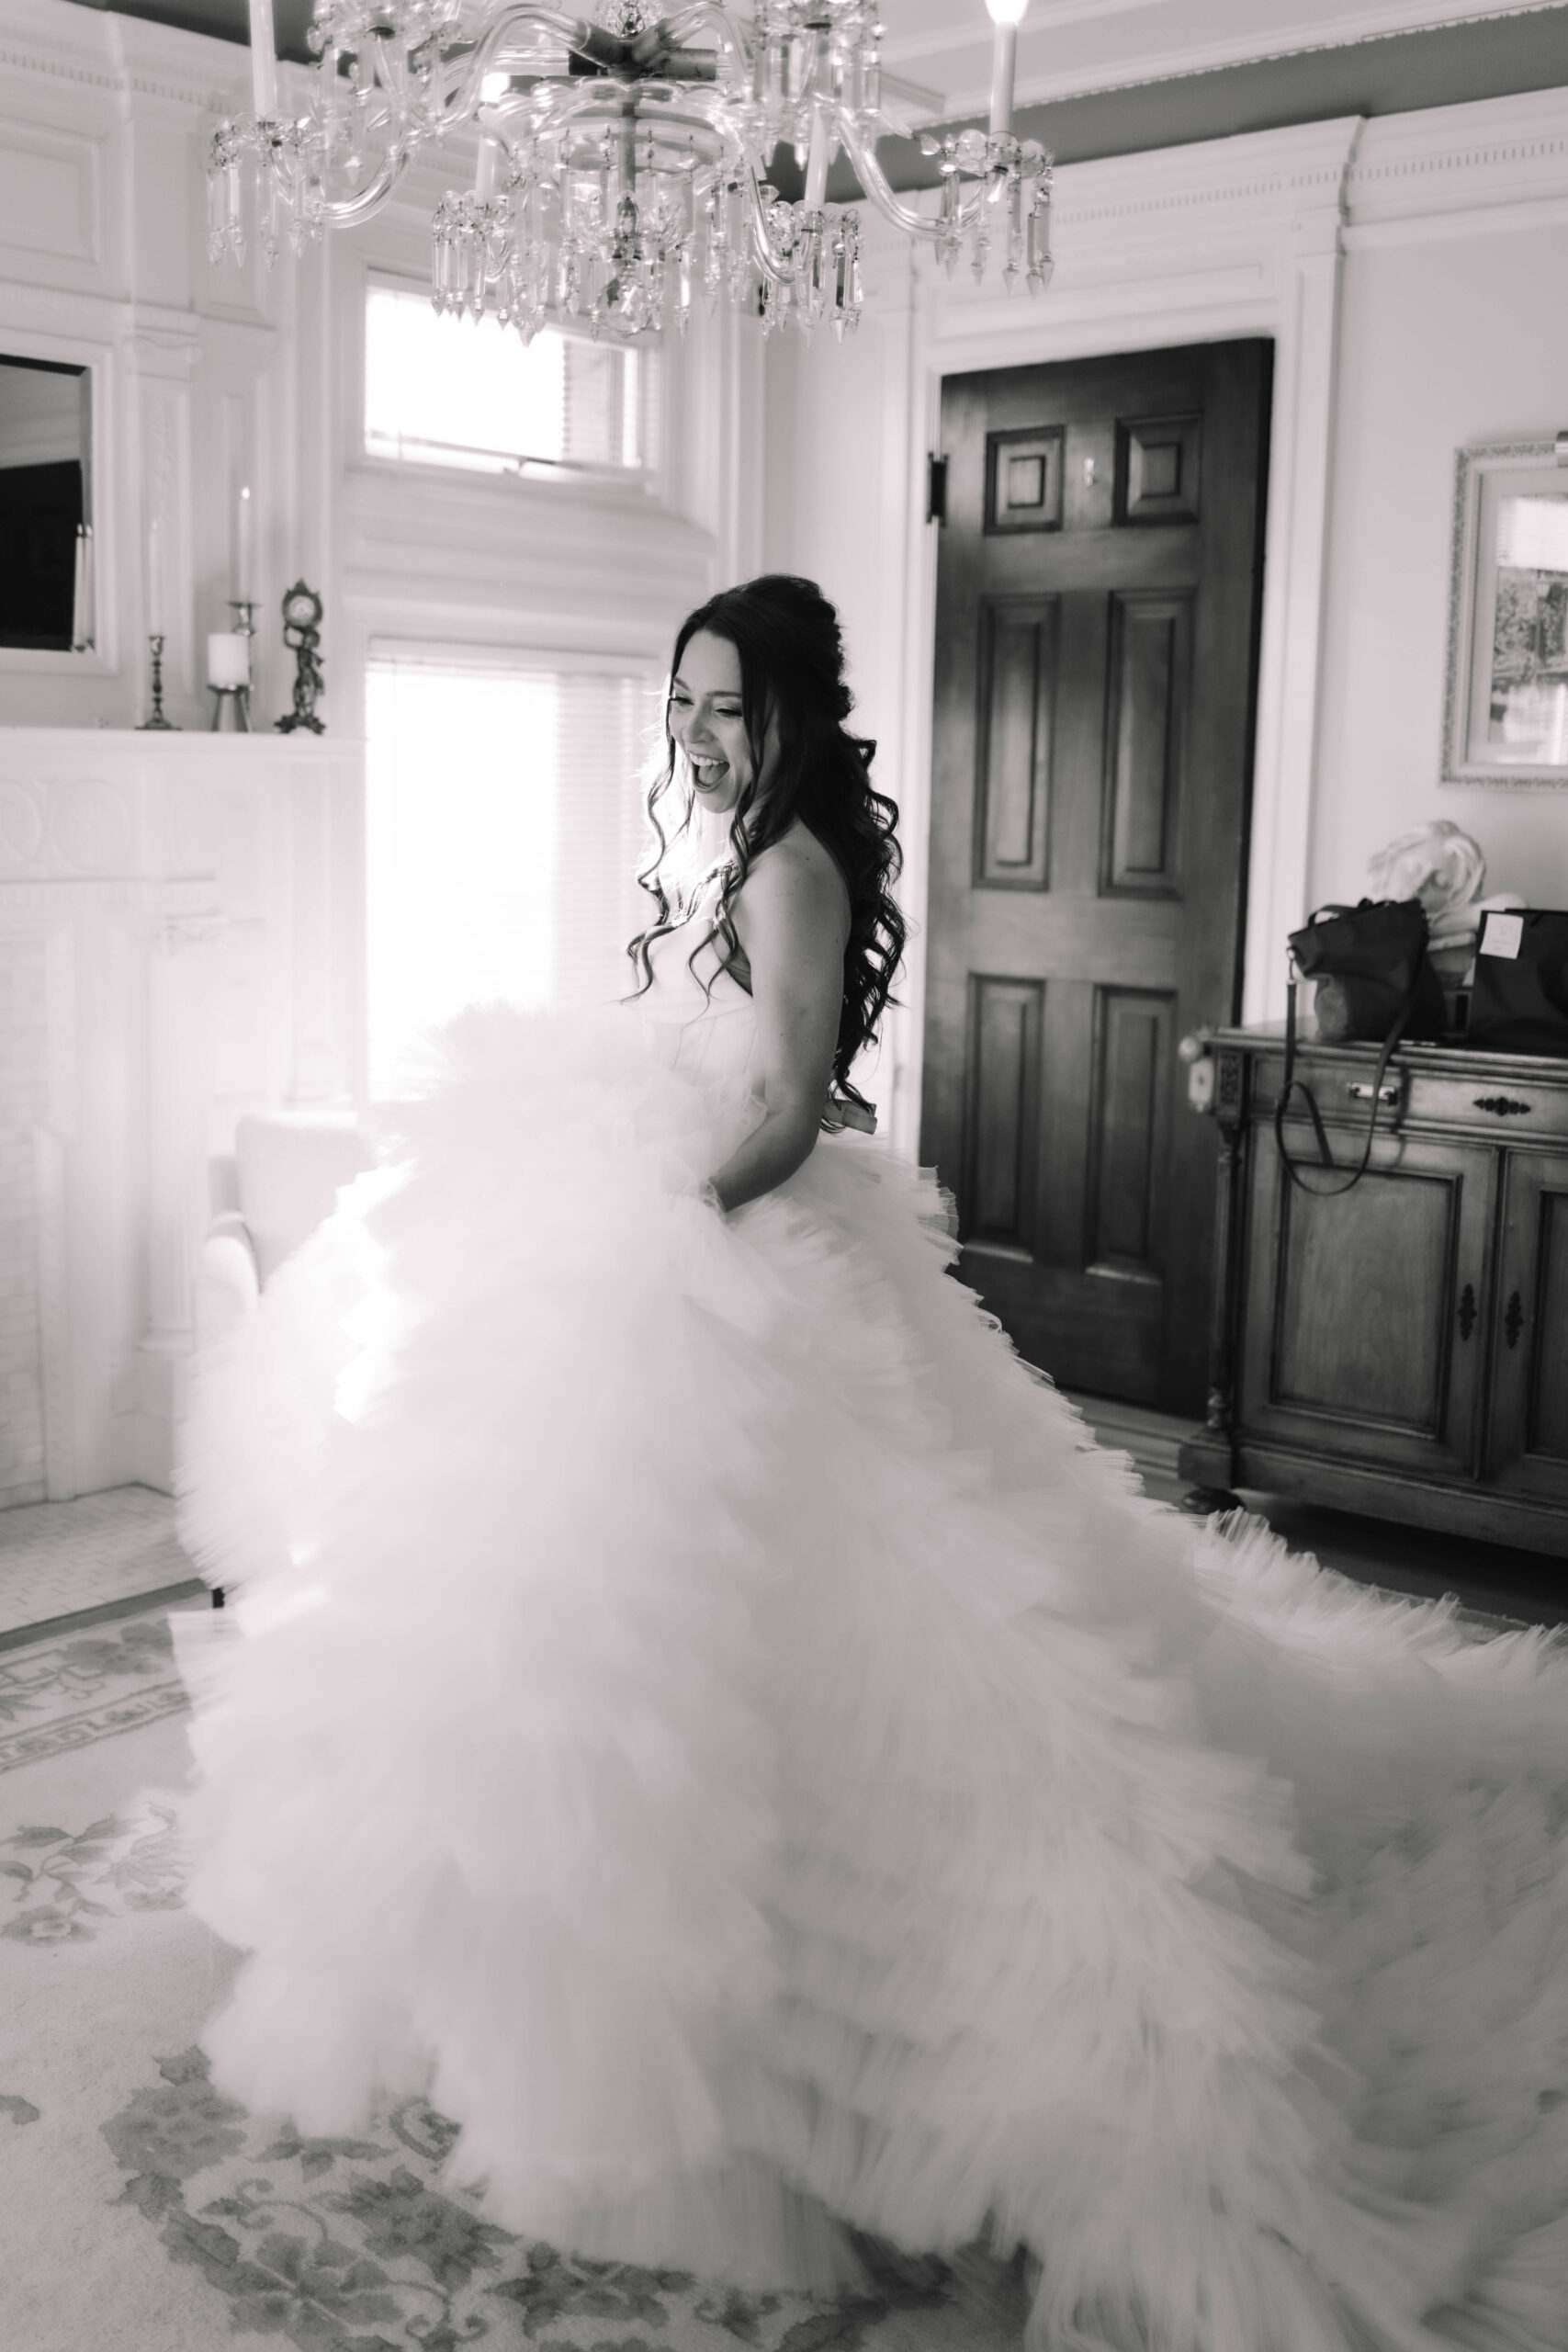 A bride swaying around in a voluptuous, ball gown dress in the bridal suite of the Van Dusen Mansion in Minneapolis, Minnesota